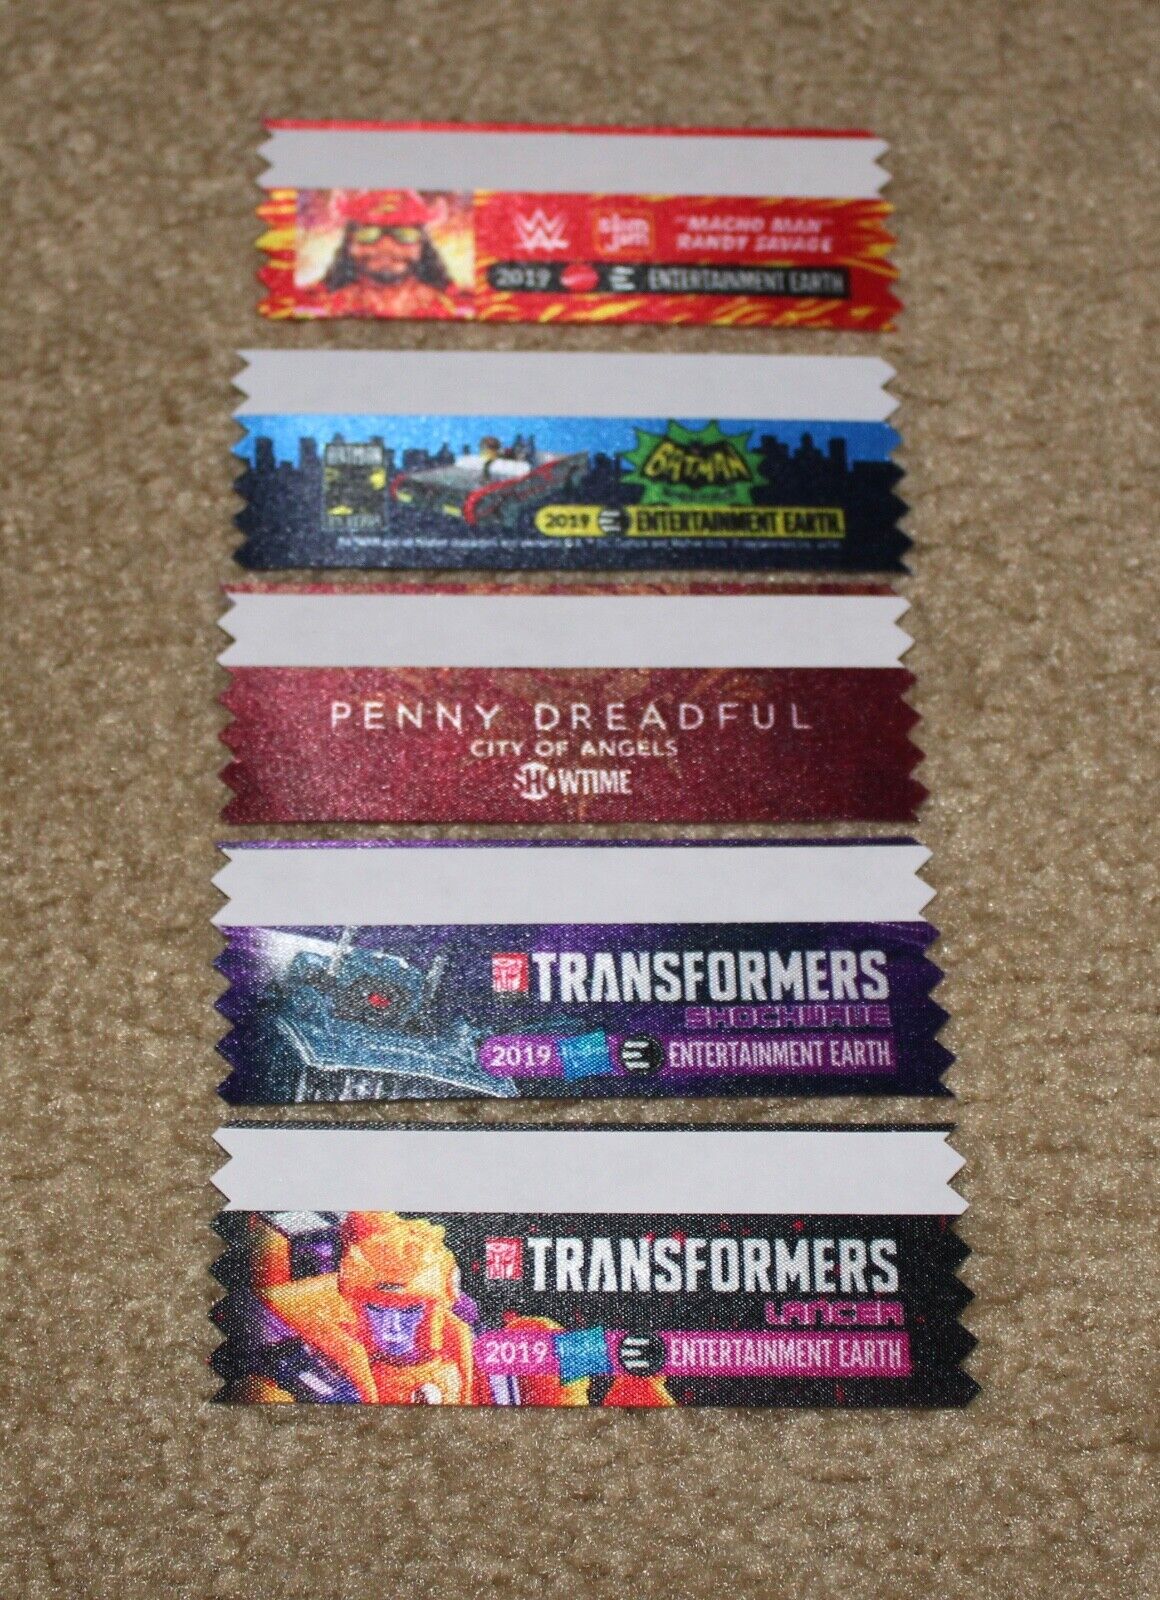 Sdcc 2019 Exclusive Entertainment Earth Badge Ribbons Set Of 5